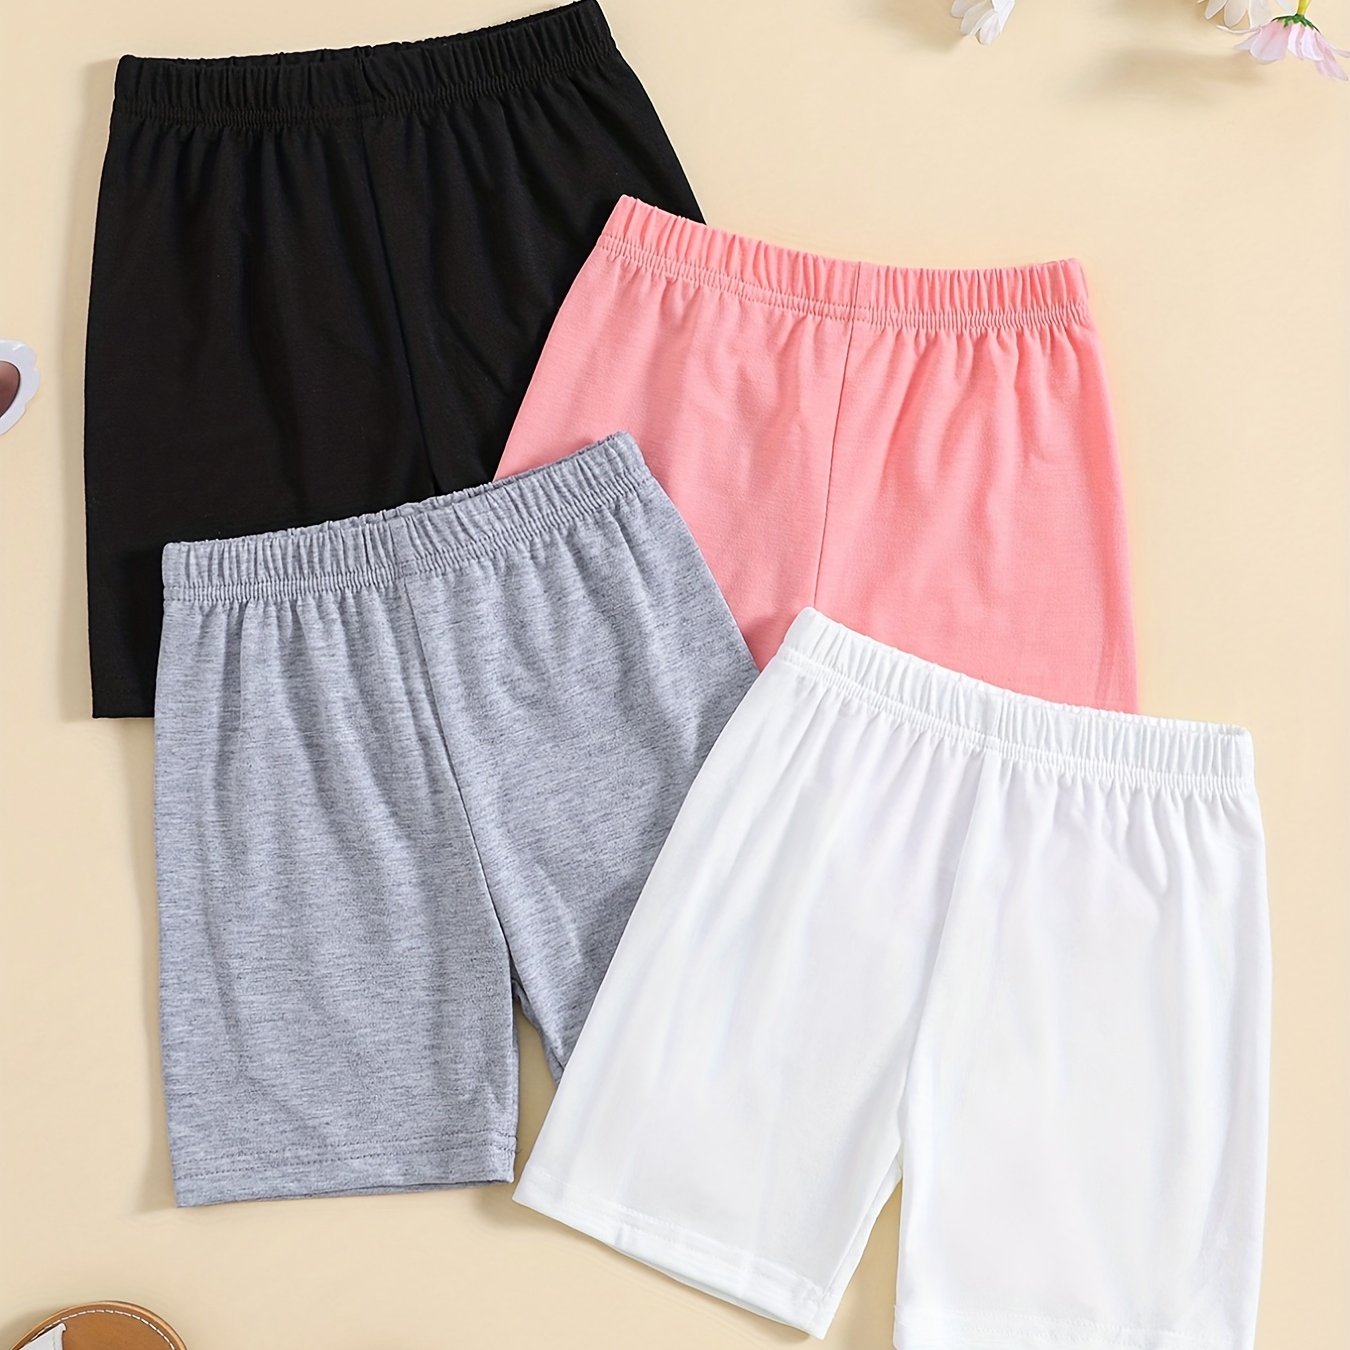 KESYOO 8 Pcs cotton underwear plus size shorts for women booty shorts for women  womens accessories women shorts accessories for women female underwear  women's pants spandex girl student at  Women's Clothing